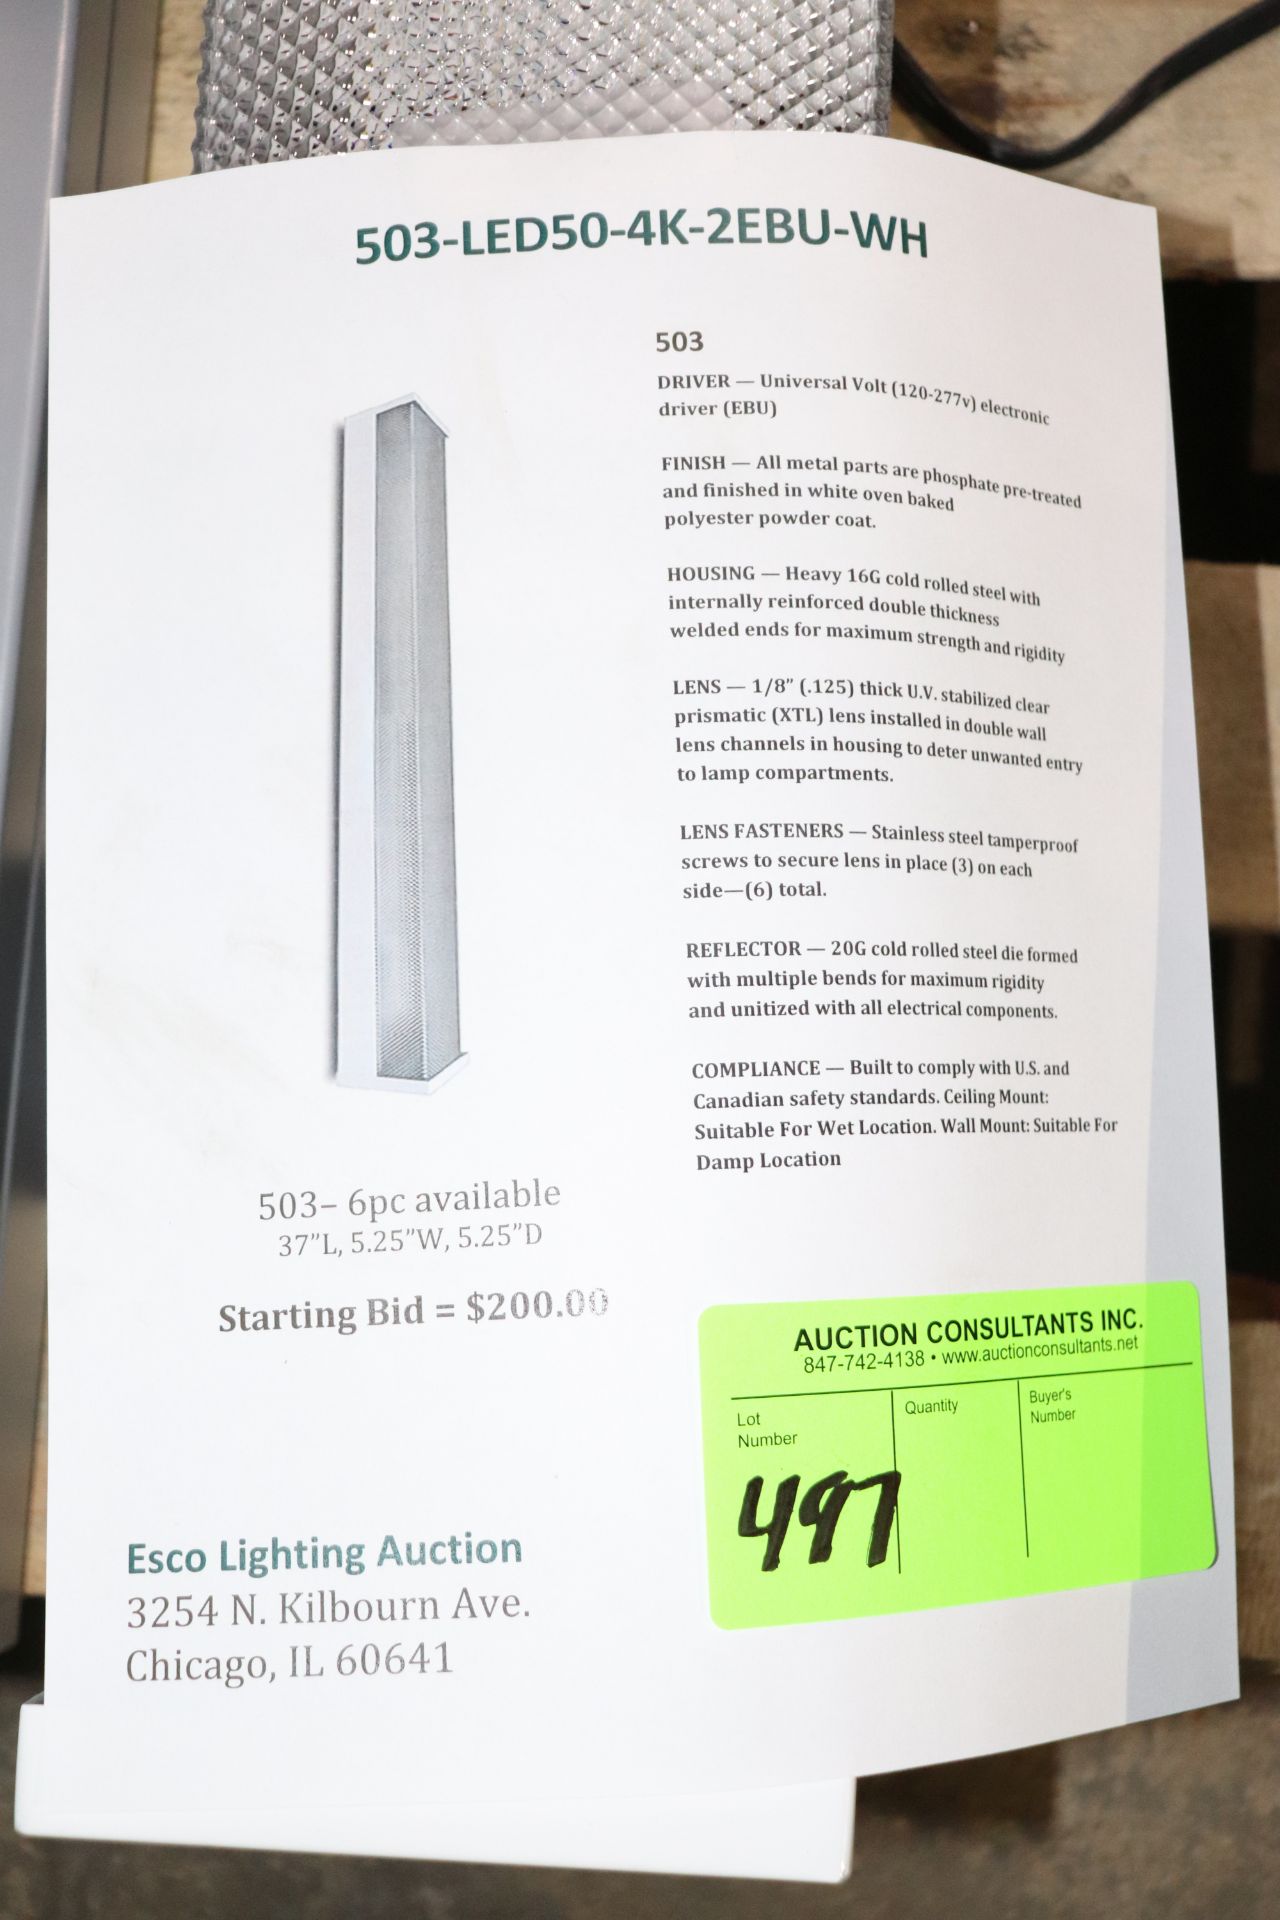 503-LED50-4K-2EBU-WH light fixture, 6 pieces available - Image 2 of 2